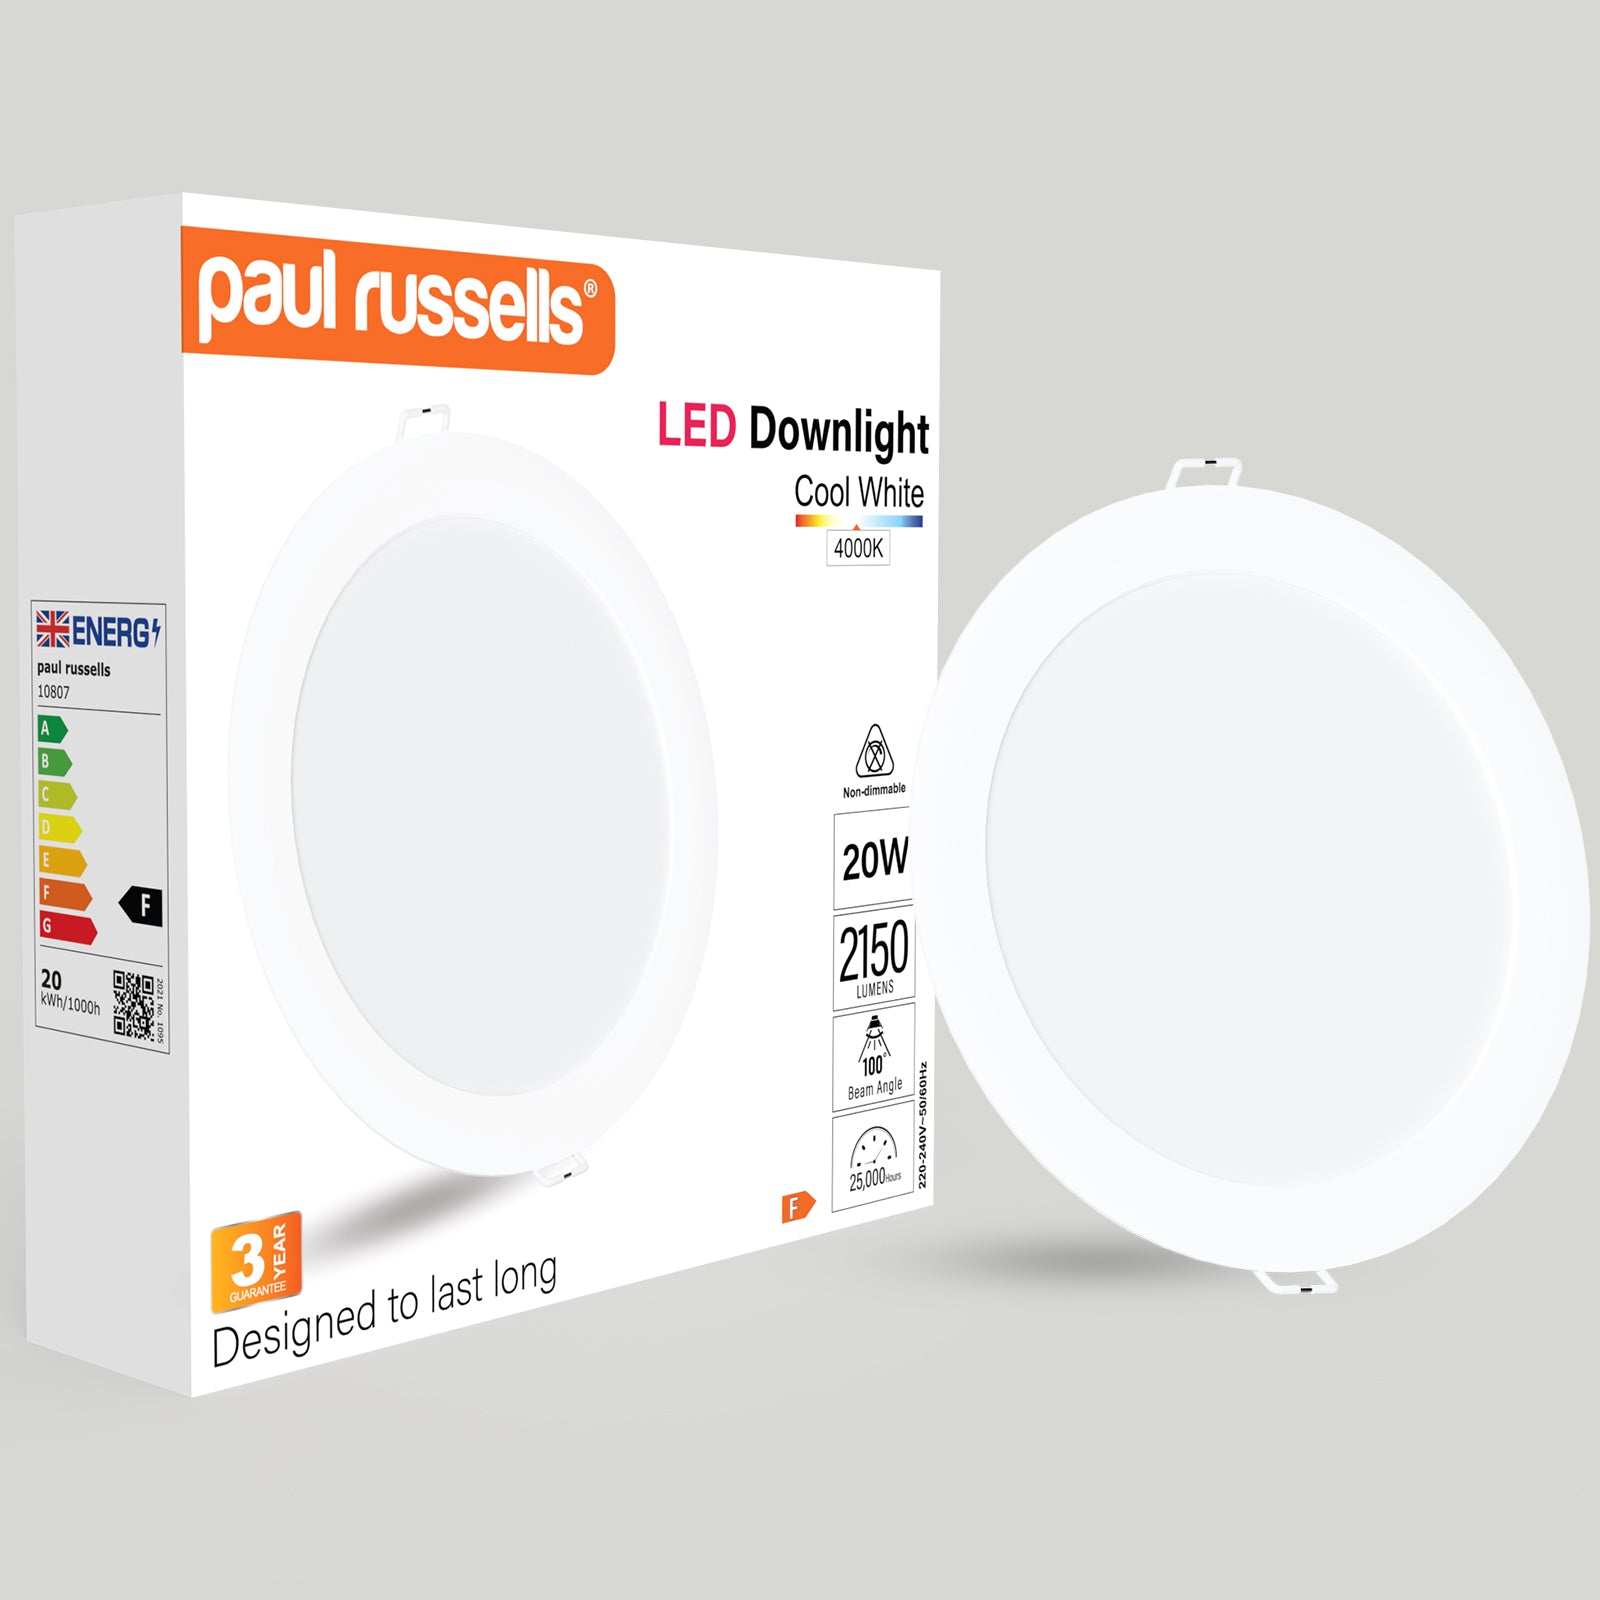 20W, LED Round Ceiling Downlights, 2150 Lumens, 4000K Cool White, Non-Dimmable Panel Spotlights